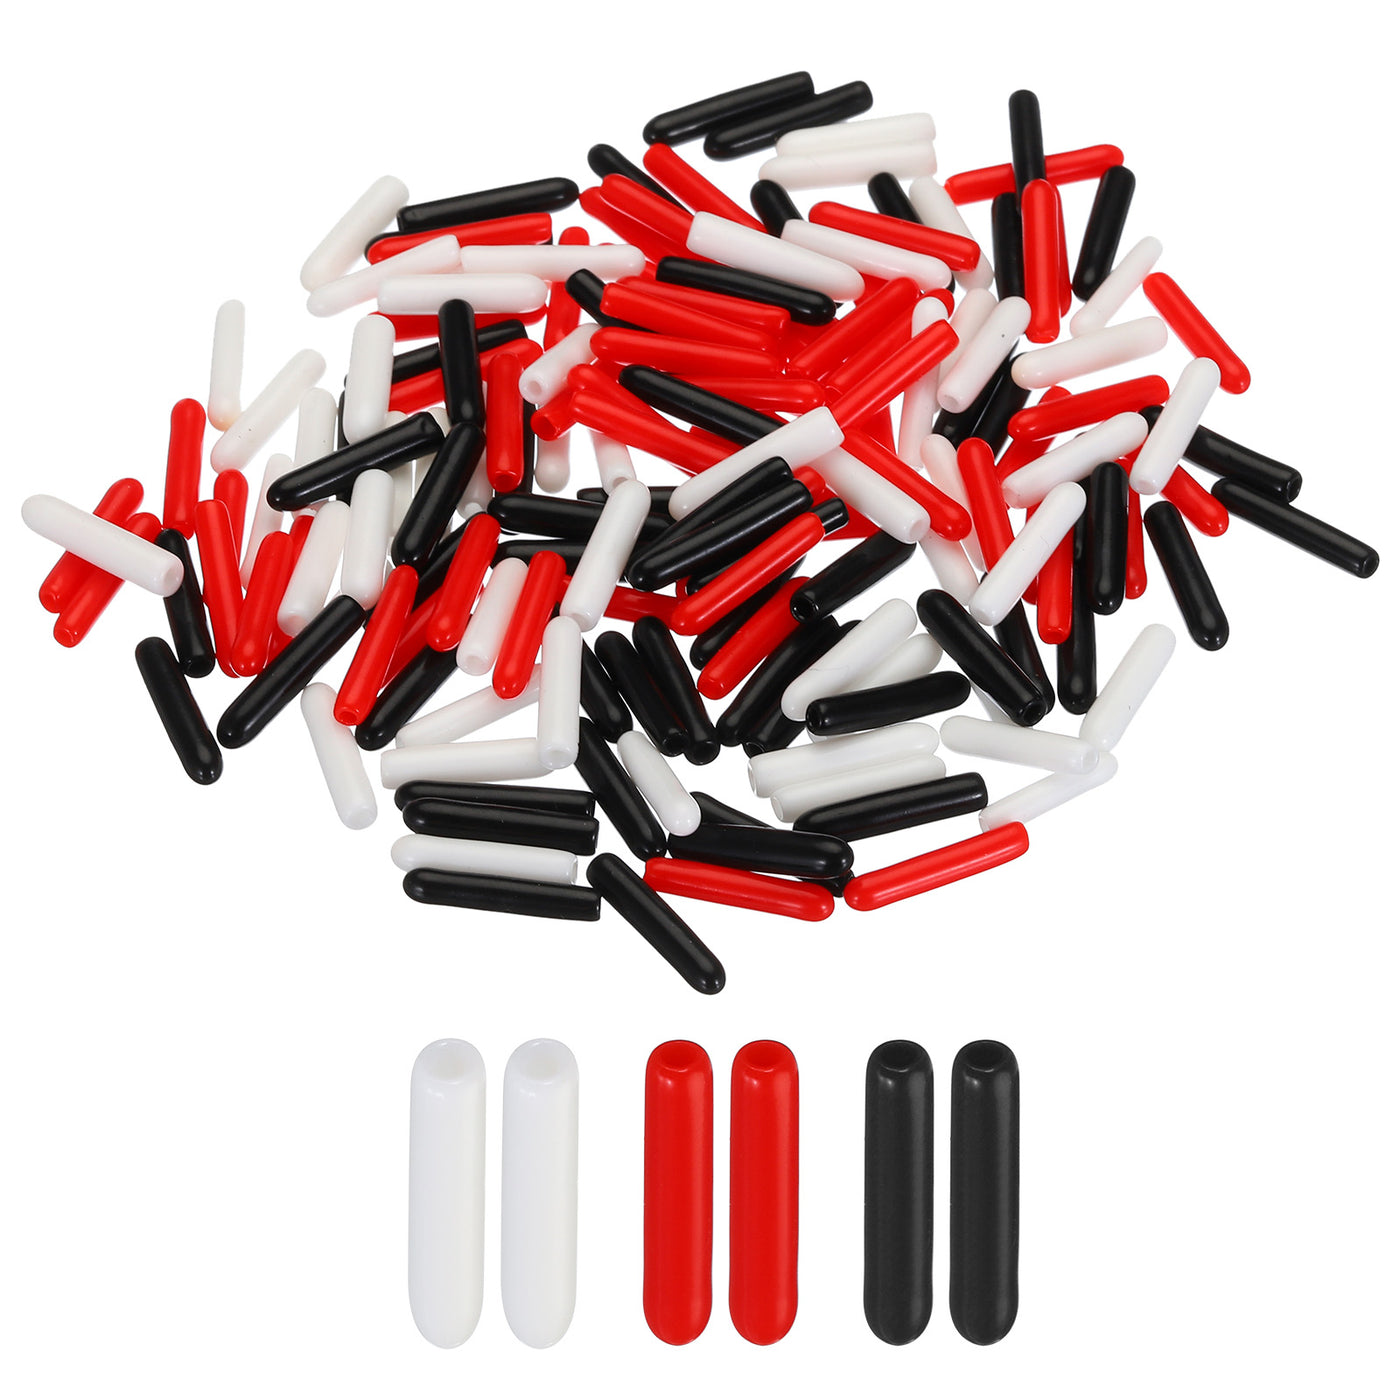 uxcell Uxcell 150pcs Rubber End Caps 1.5mm ID Vinyl Round Tube Bolt Cap Cover Screw Thread Protectors Black, Red, White